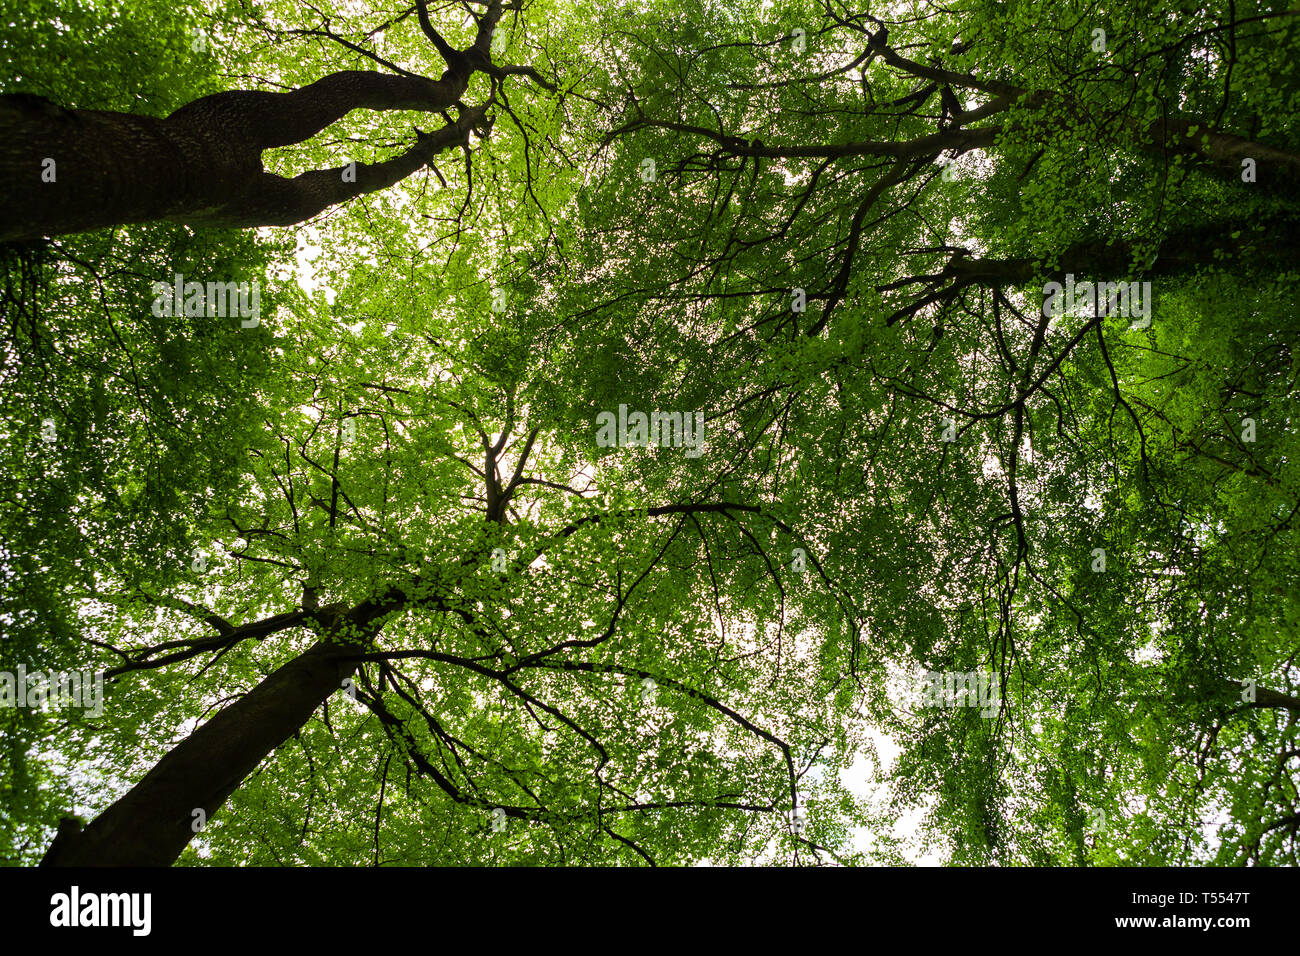 Upwards view of tree trunks and foliage in a lush forest Stock Photo